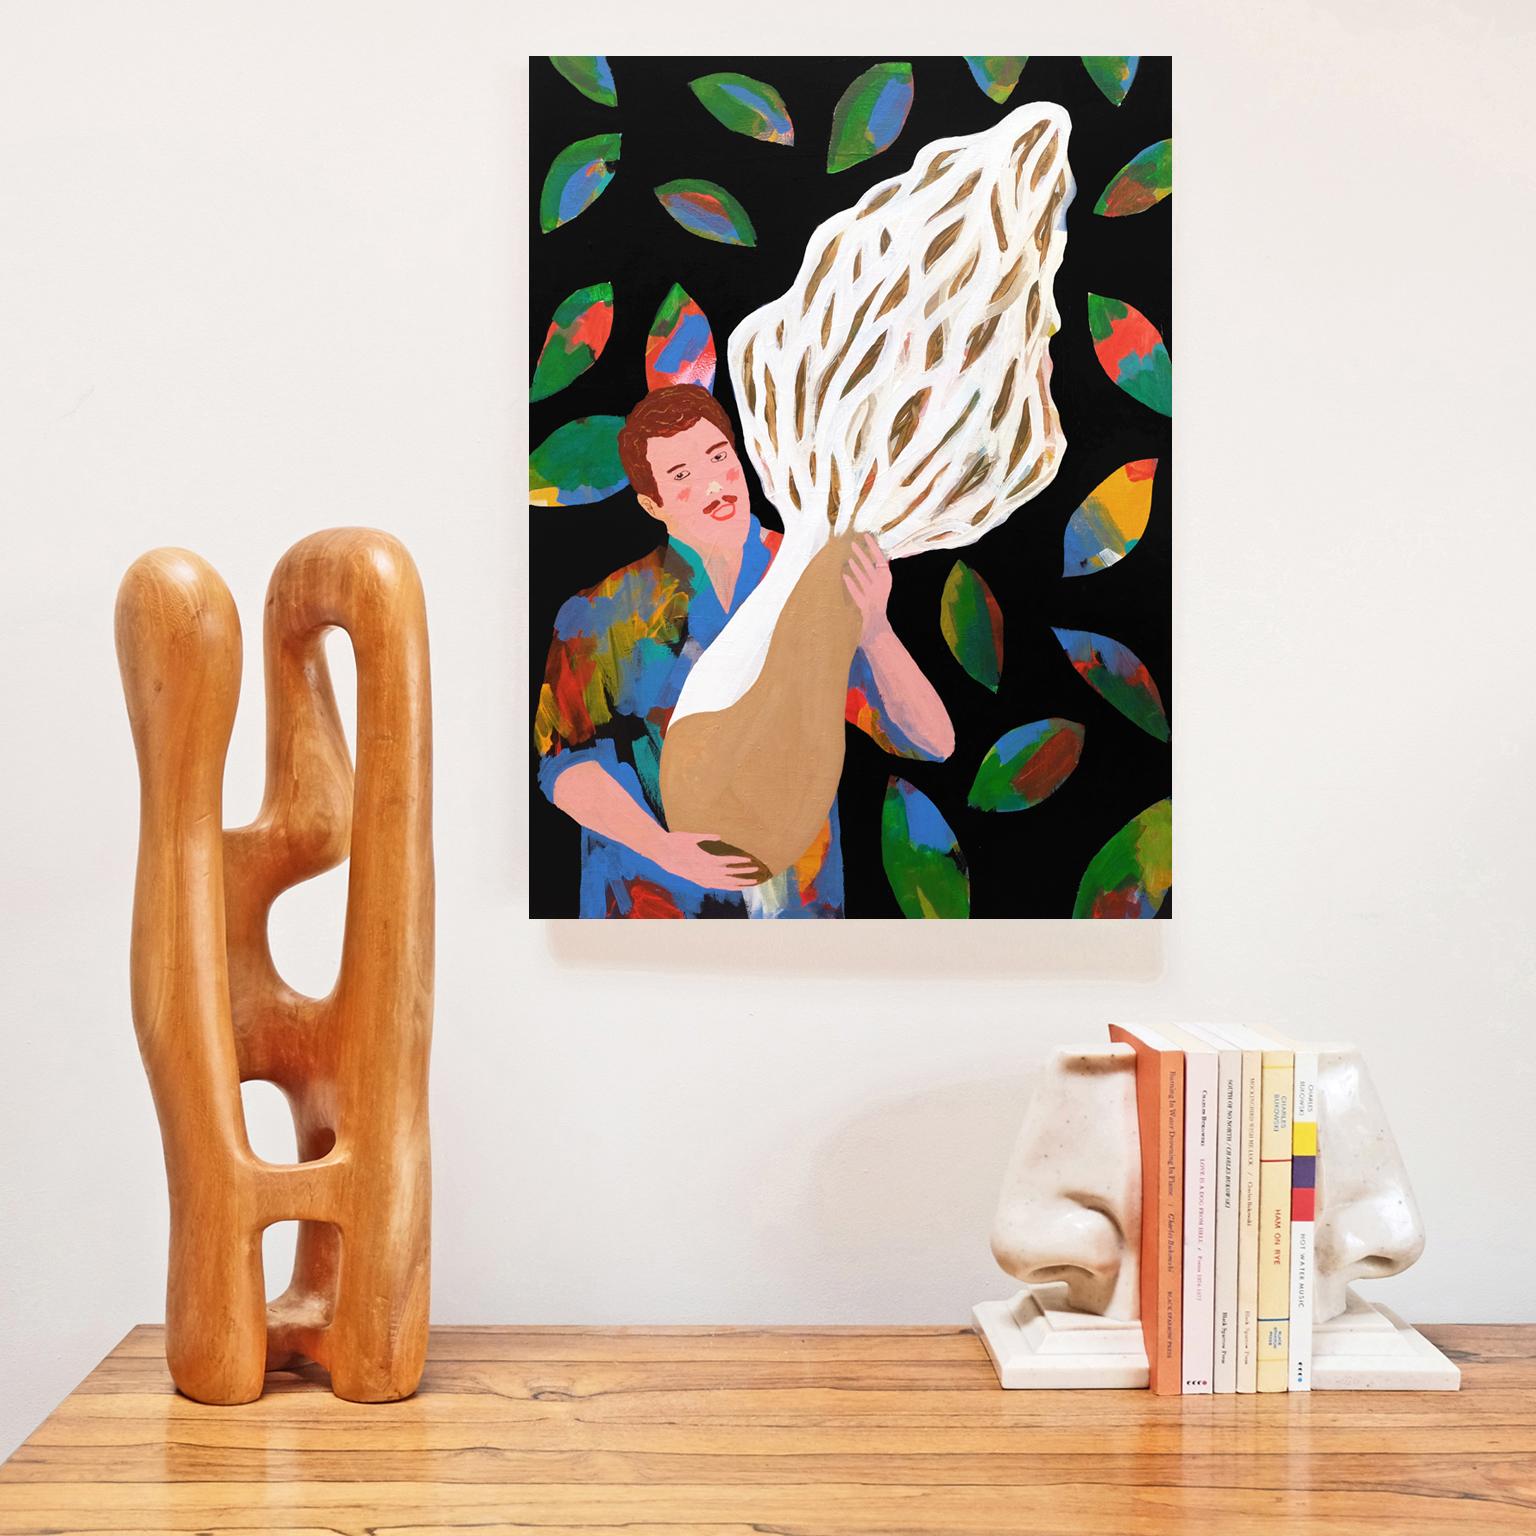 English 'The Biggest Morel in the World?' Portrait Painting by Alan Fears Pop Art